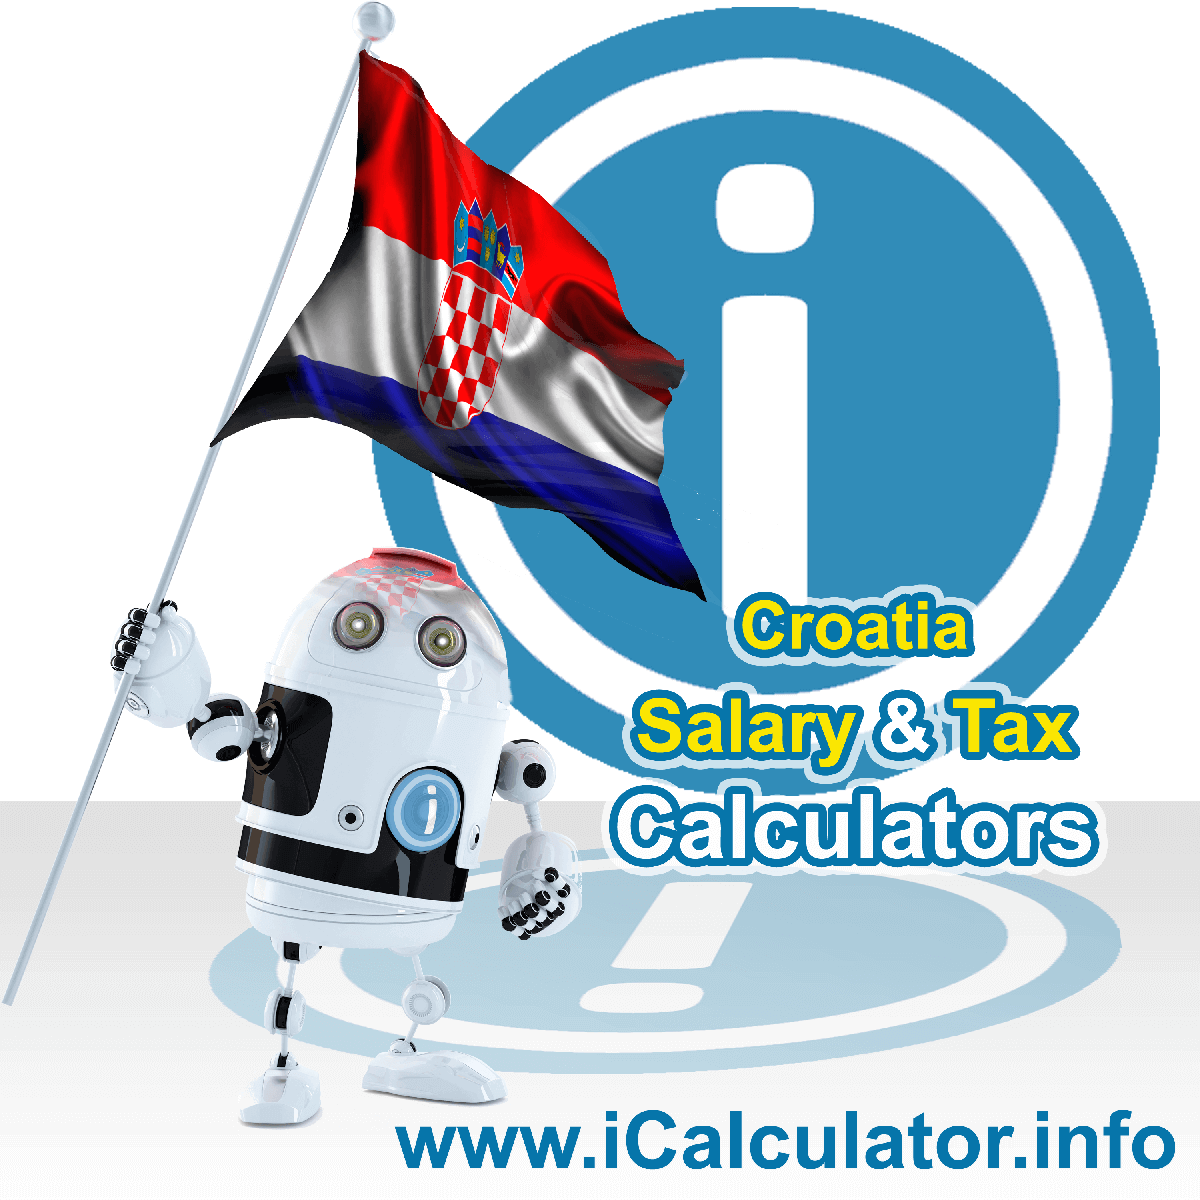 Croatia Salary Calculator. This image shows the Croatiaese flag and information relating to the tax formula for the Croatia Tax Calculator